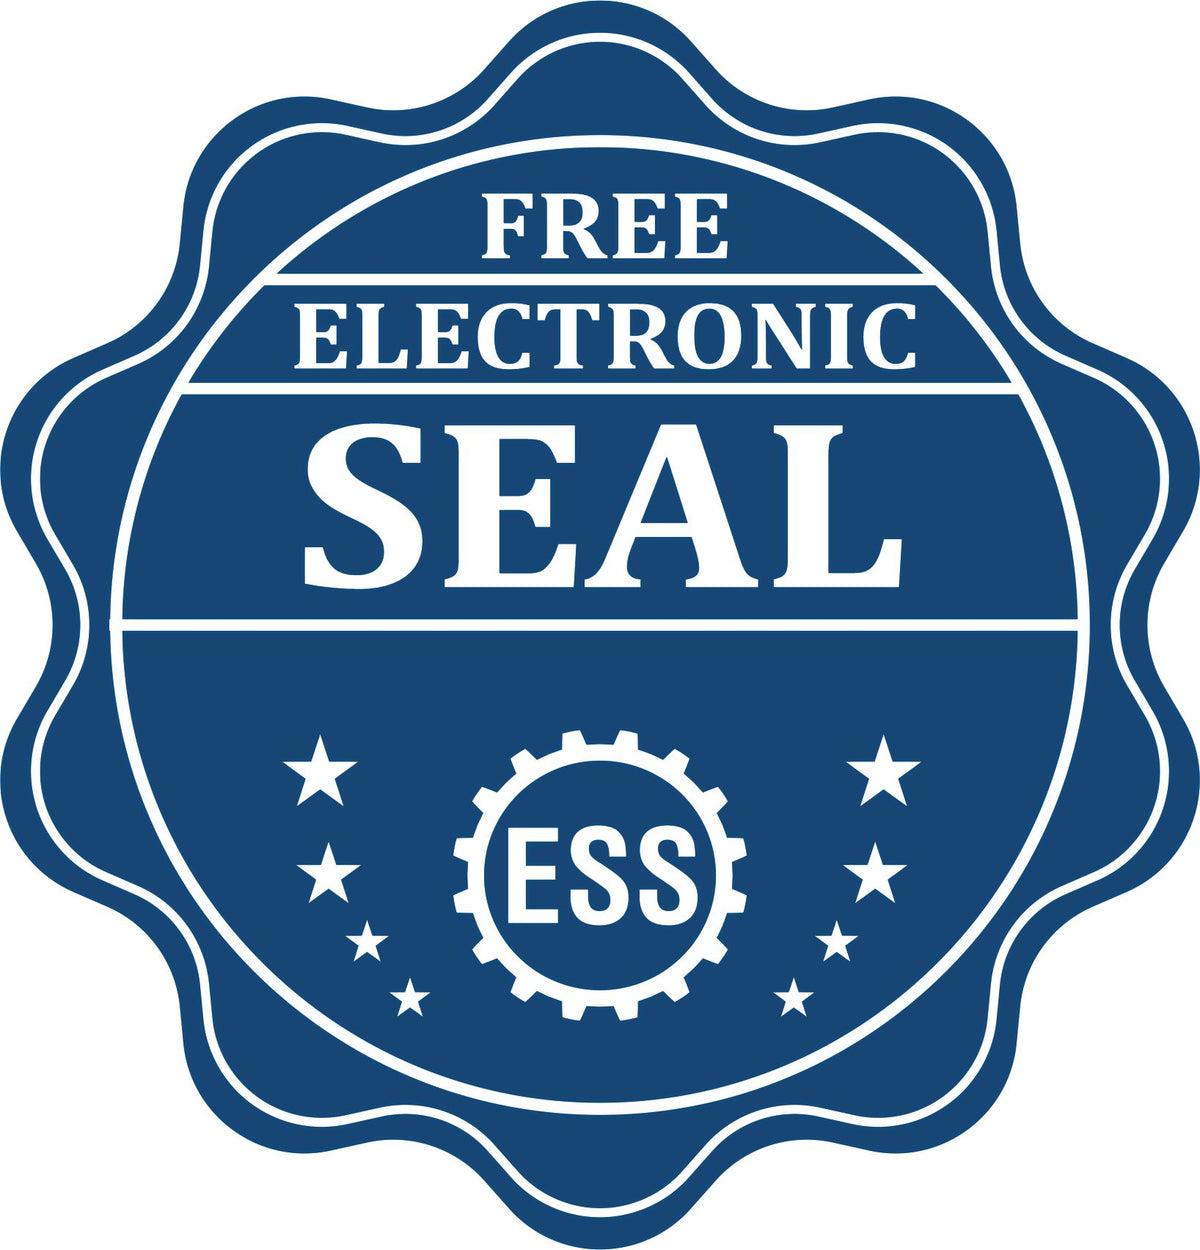 A badge showing a free electronic seal for the Handheld Washington Professional Engineer Embosser with stars and the ESS gear on the emblem.